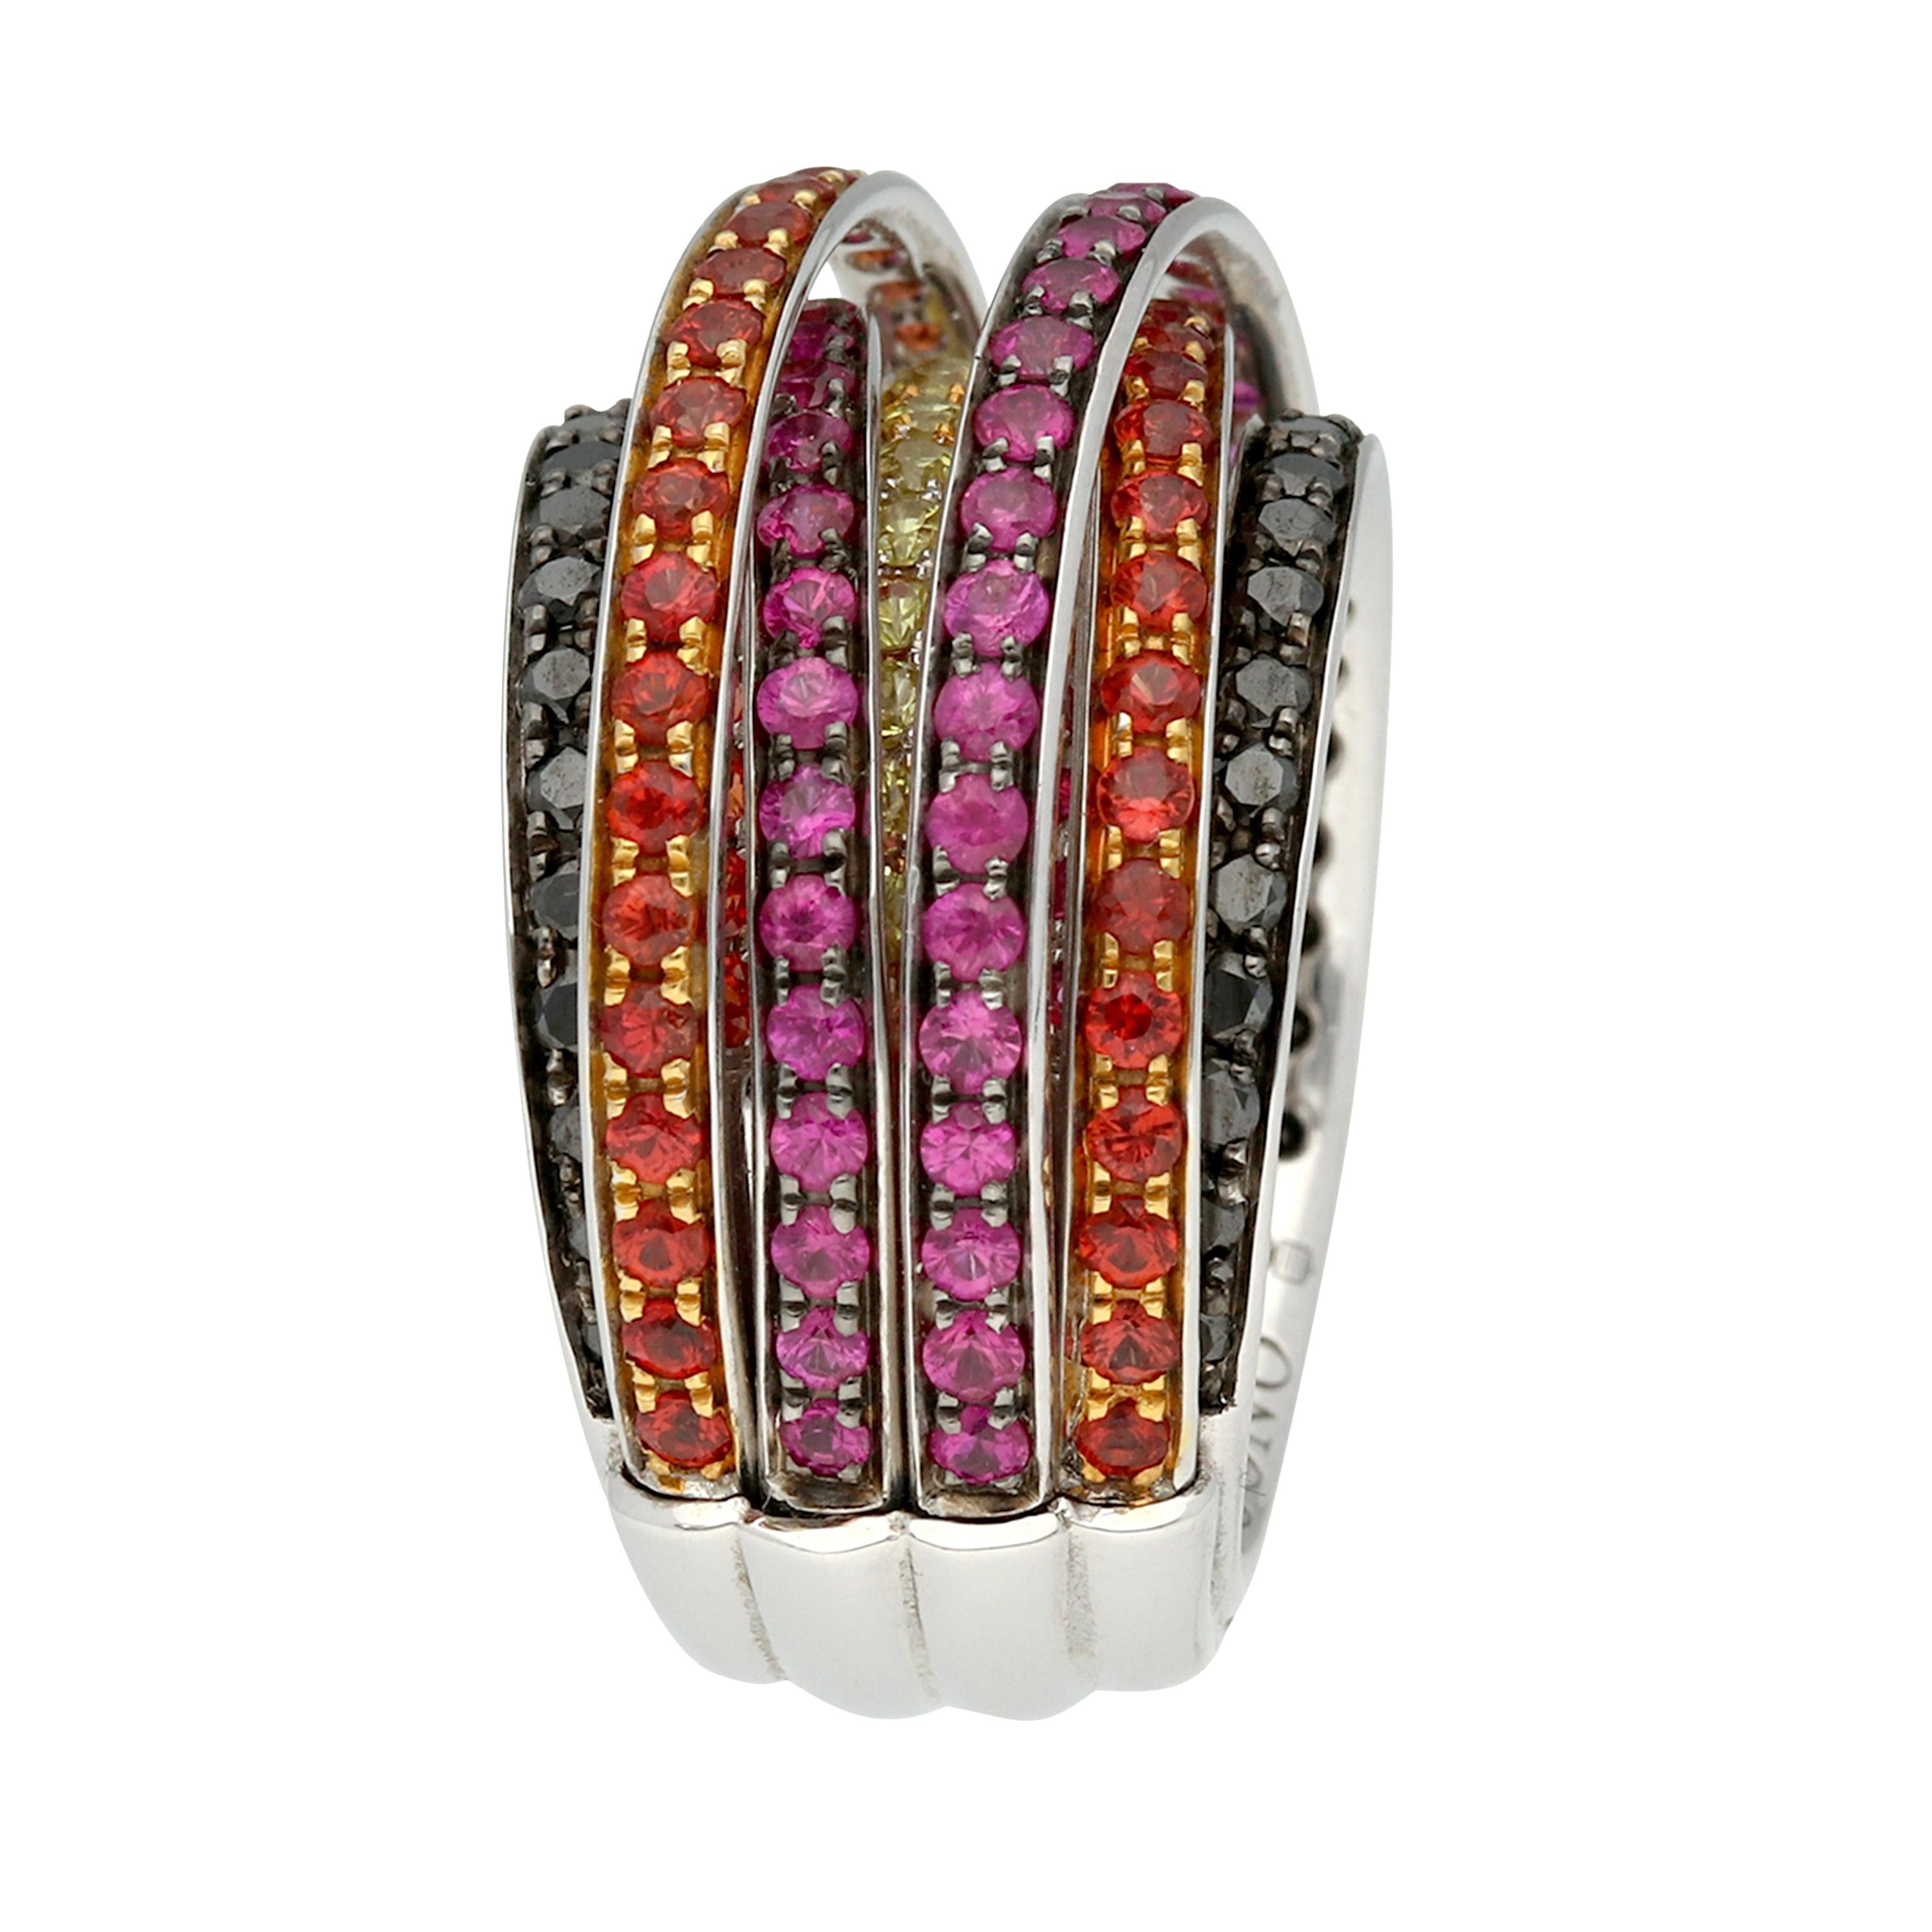 de GRISOGONO 'ALLEGRA' Gold Multi-Gem Diamonds Sapphires Cocktail Ring

Colorful de GRISOGONO ring in white gold, set with black diamonds, pink, yellow and orange sapphires. This piece looks like numerous bands stacked together in an eternal